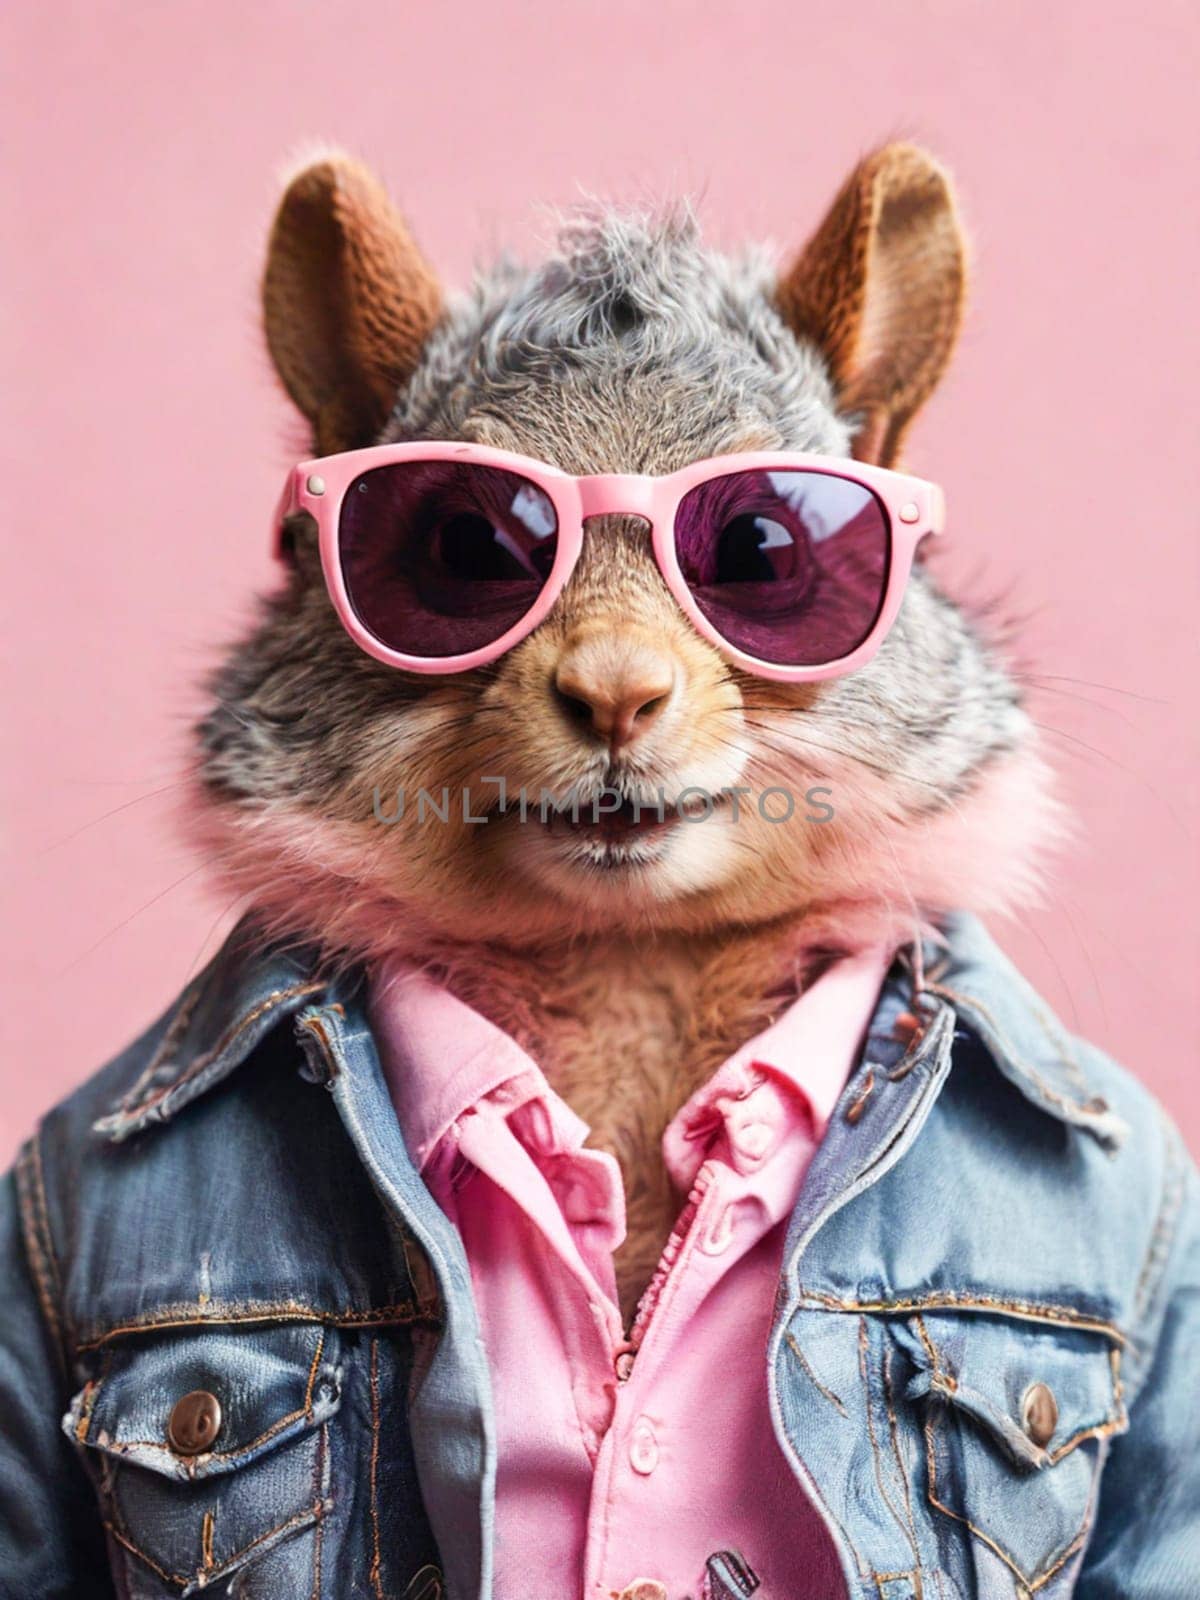 Squirrel man wearing a denim jacket and a pink shirt with pink glasses on a pink background.